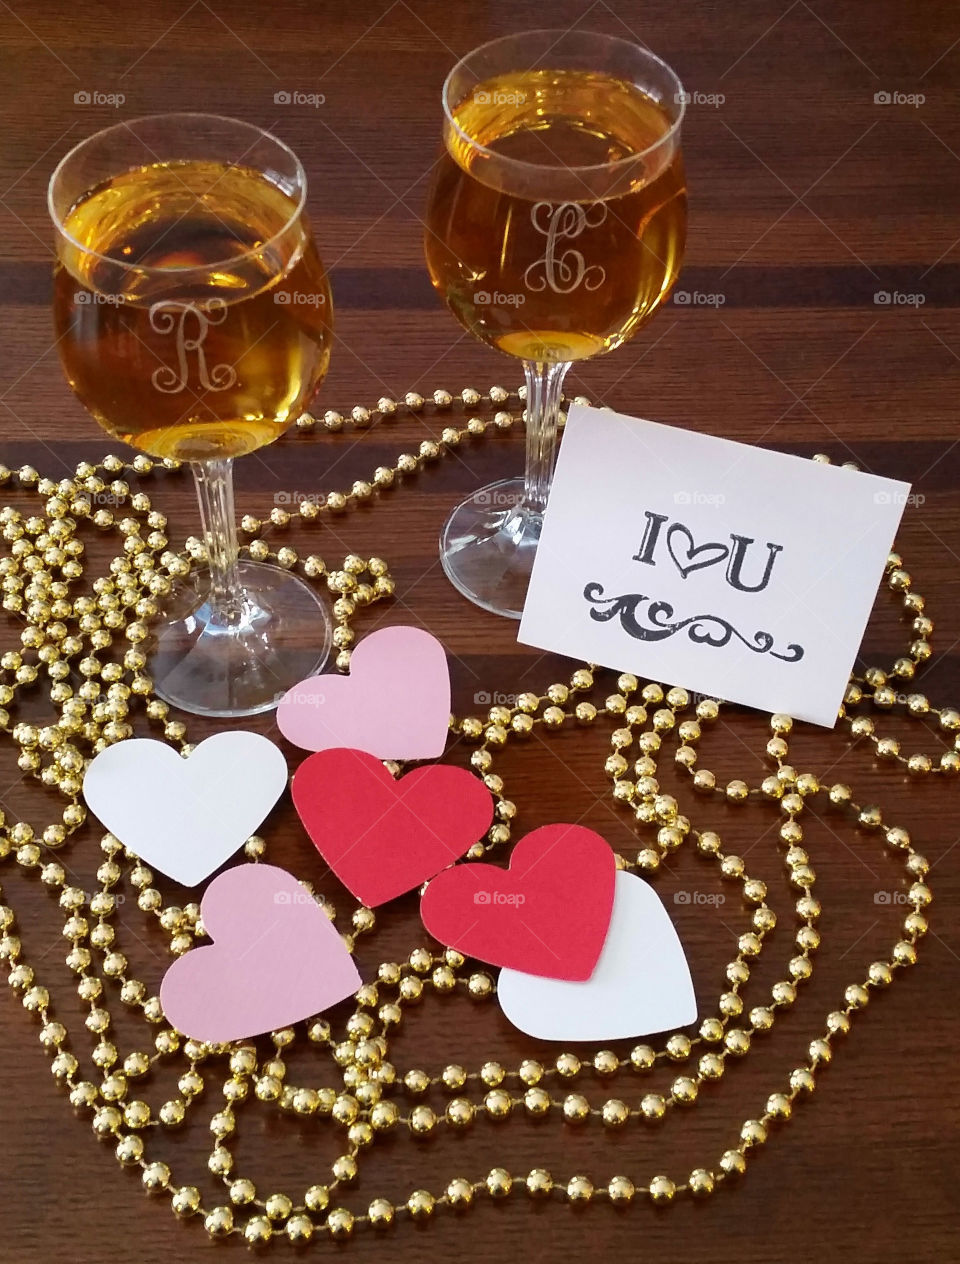 Wine glasses with gold beads and hearts